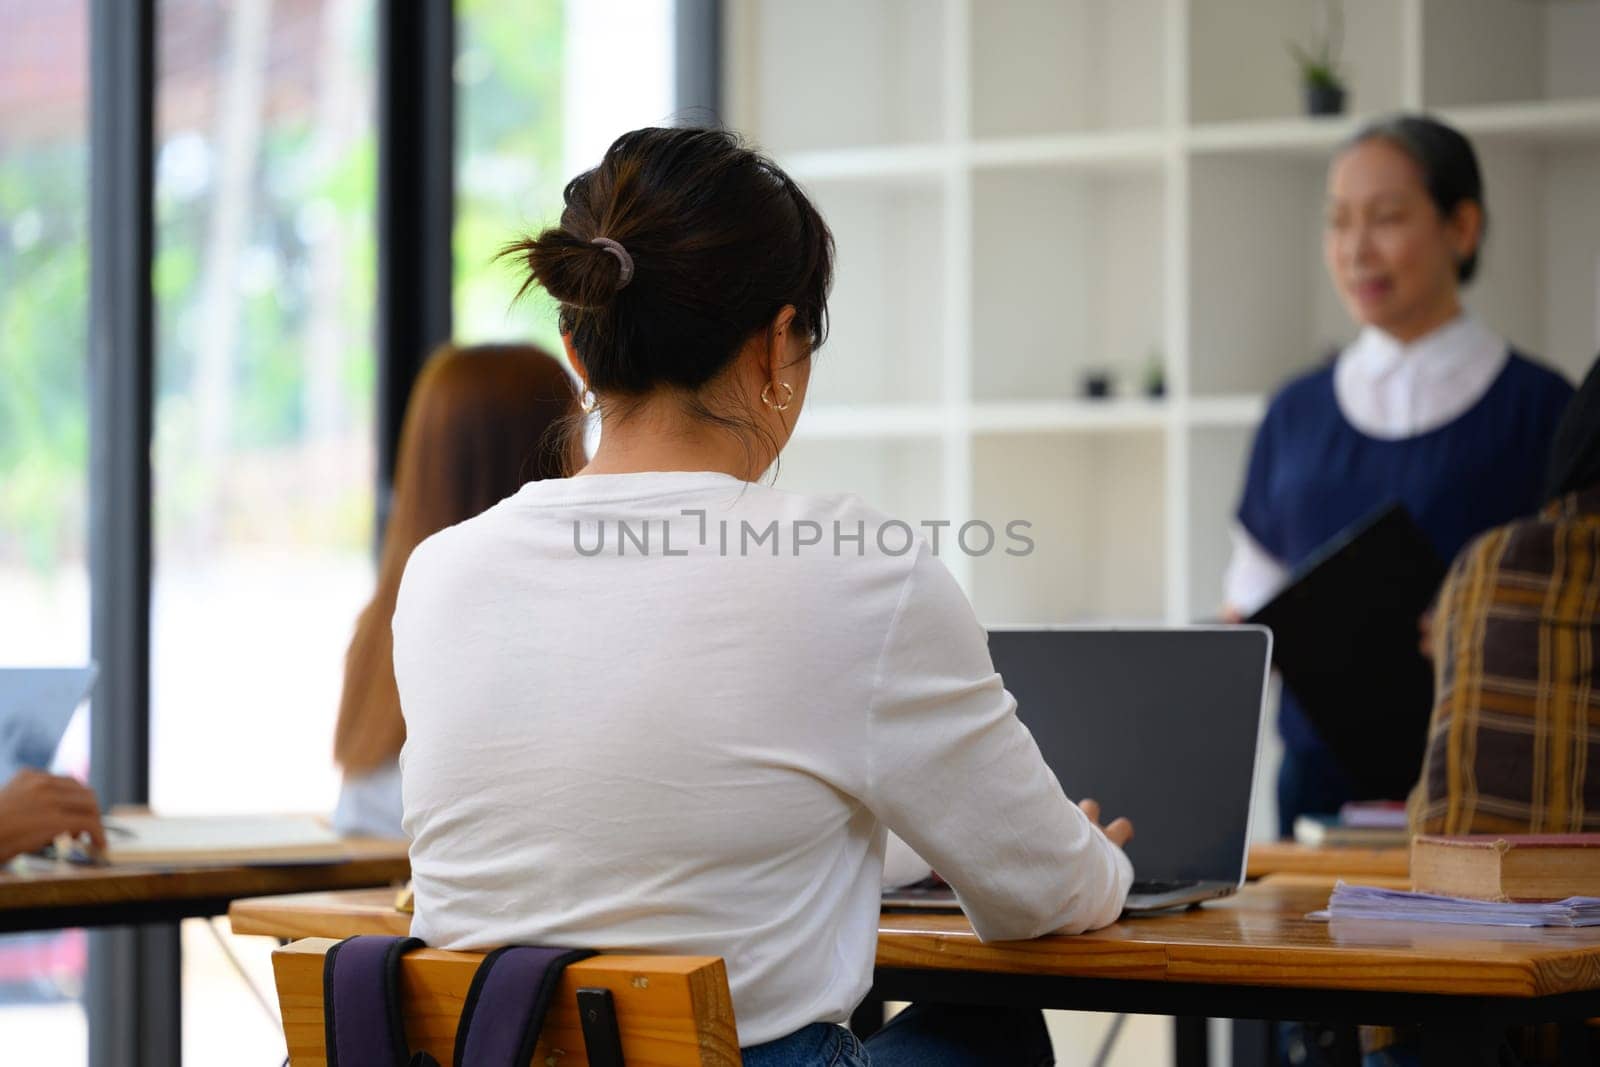 Back view of a female student using laptop during class at university.